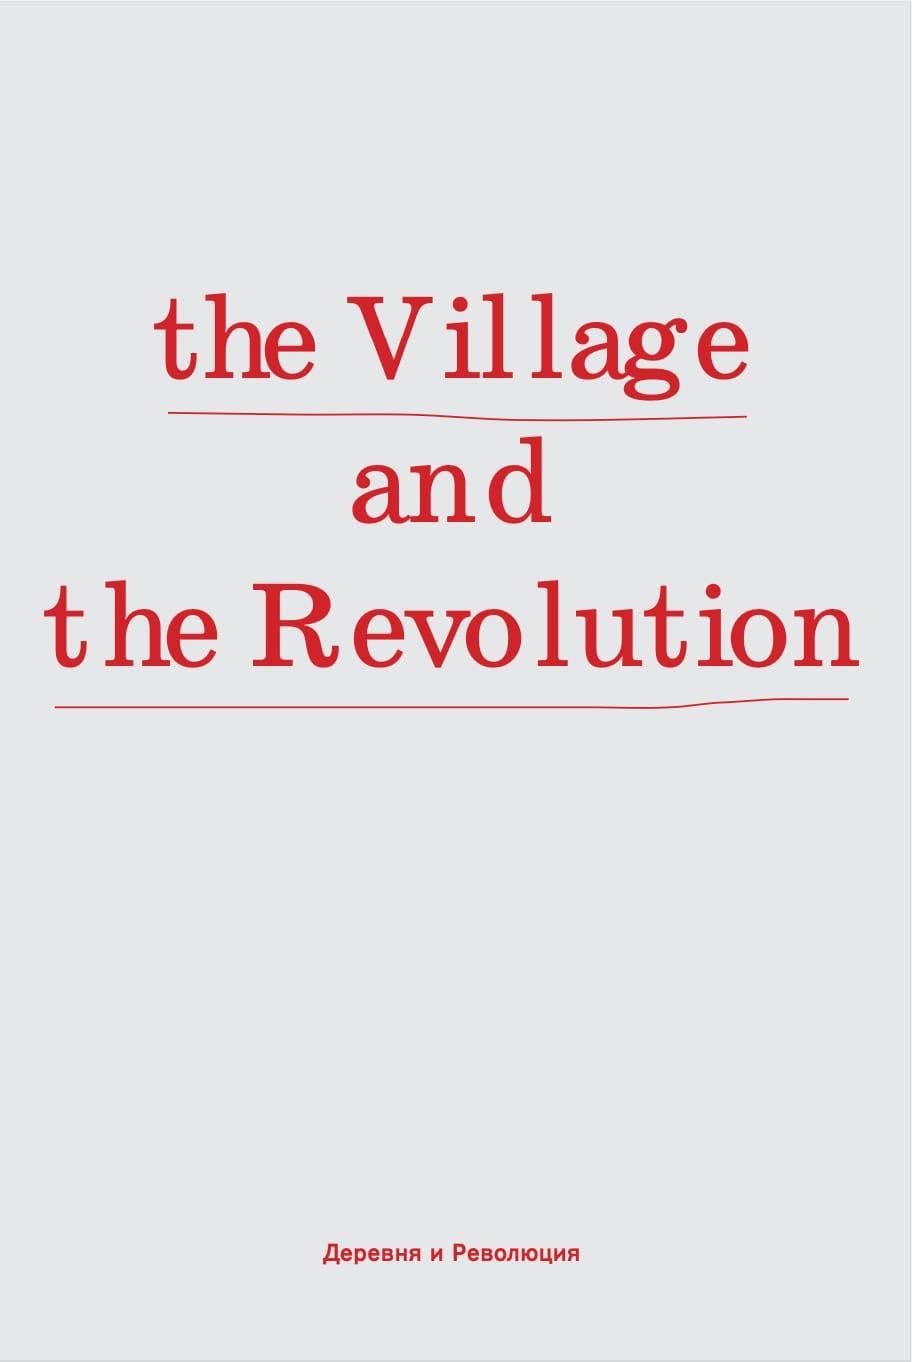 the Village and the Revolution